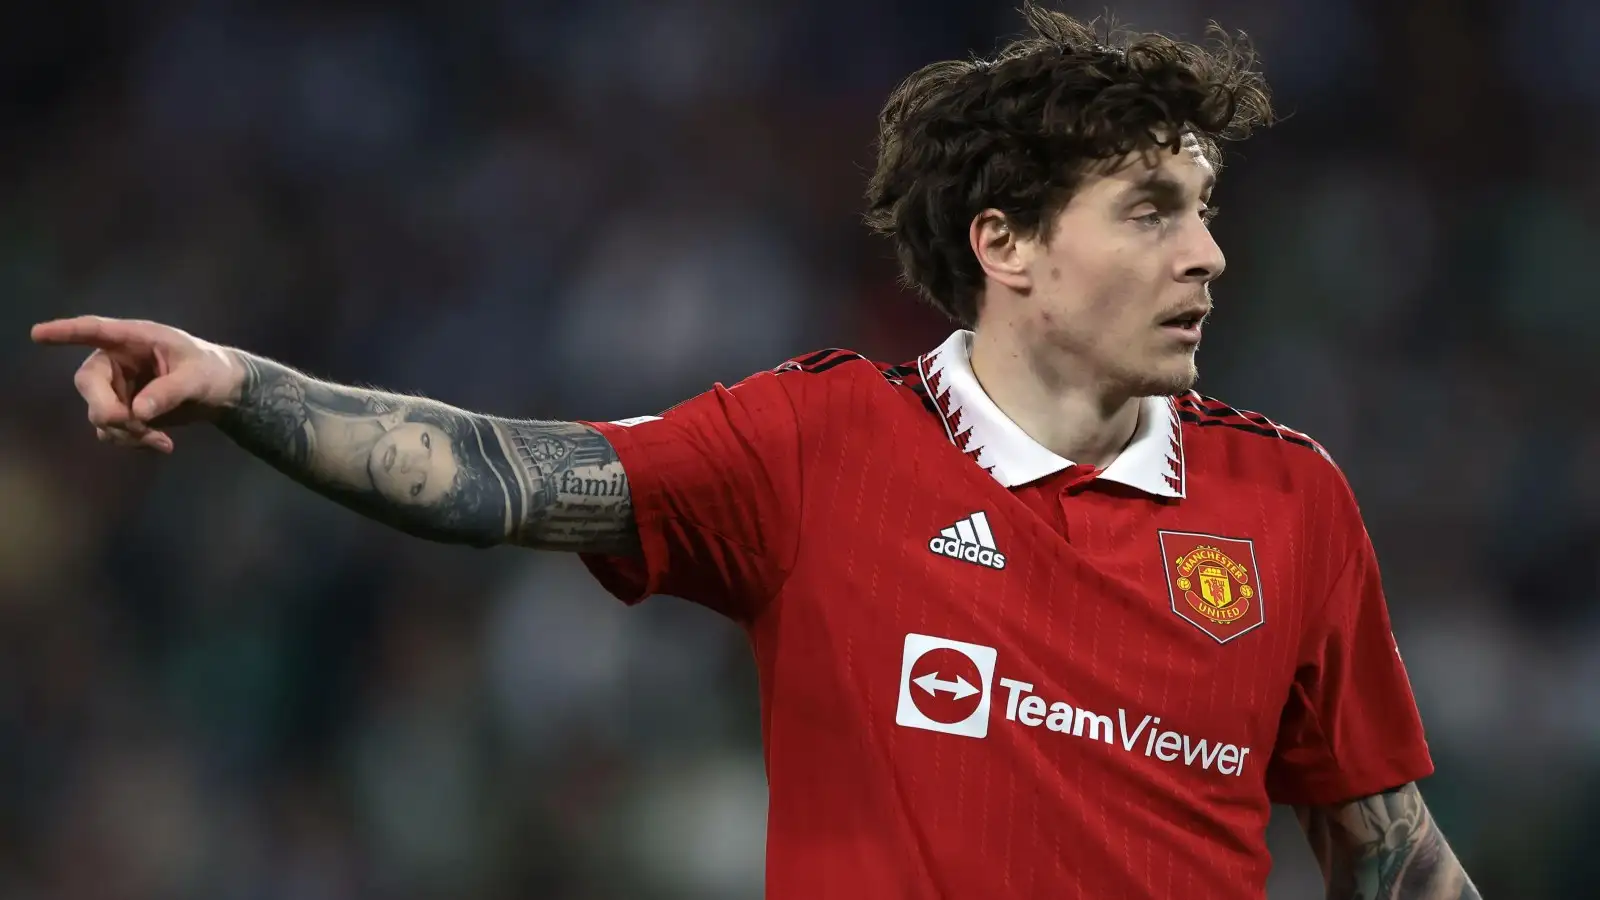 Report reveals £31m international is ‘leaving Man Utd’ as Inter-linked star outlines desire to ‘play’